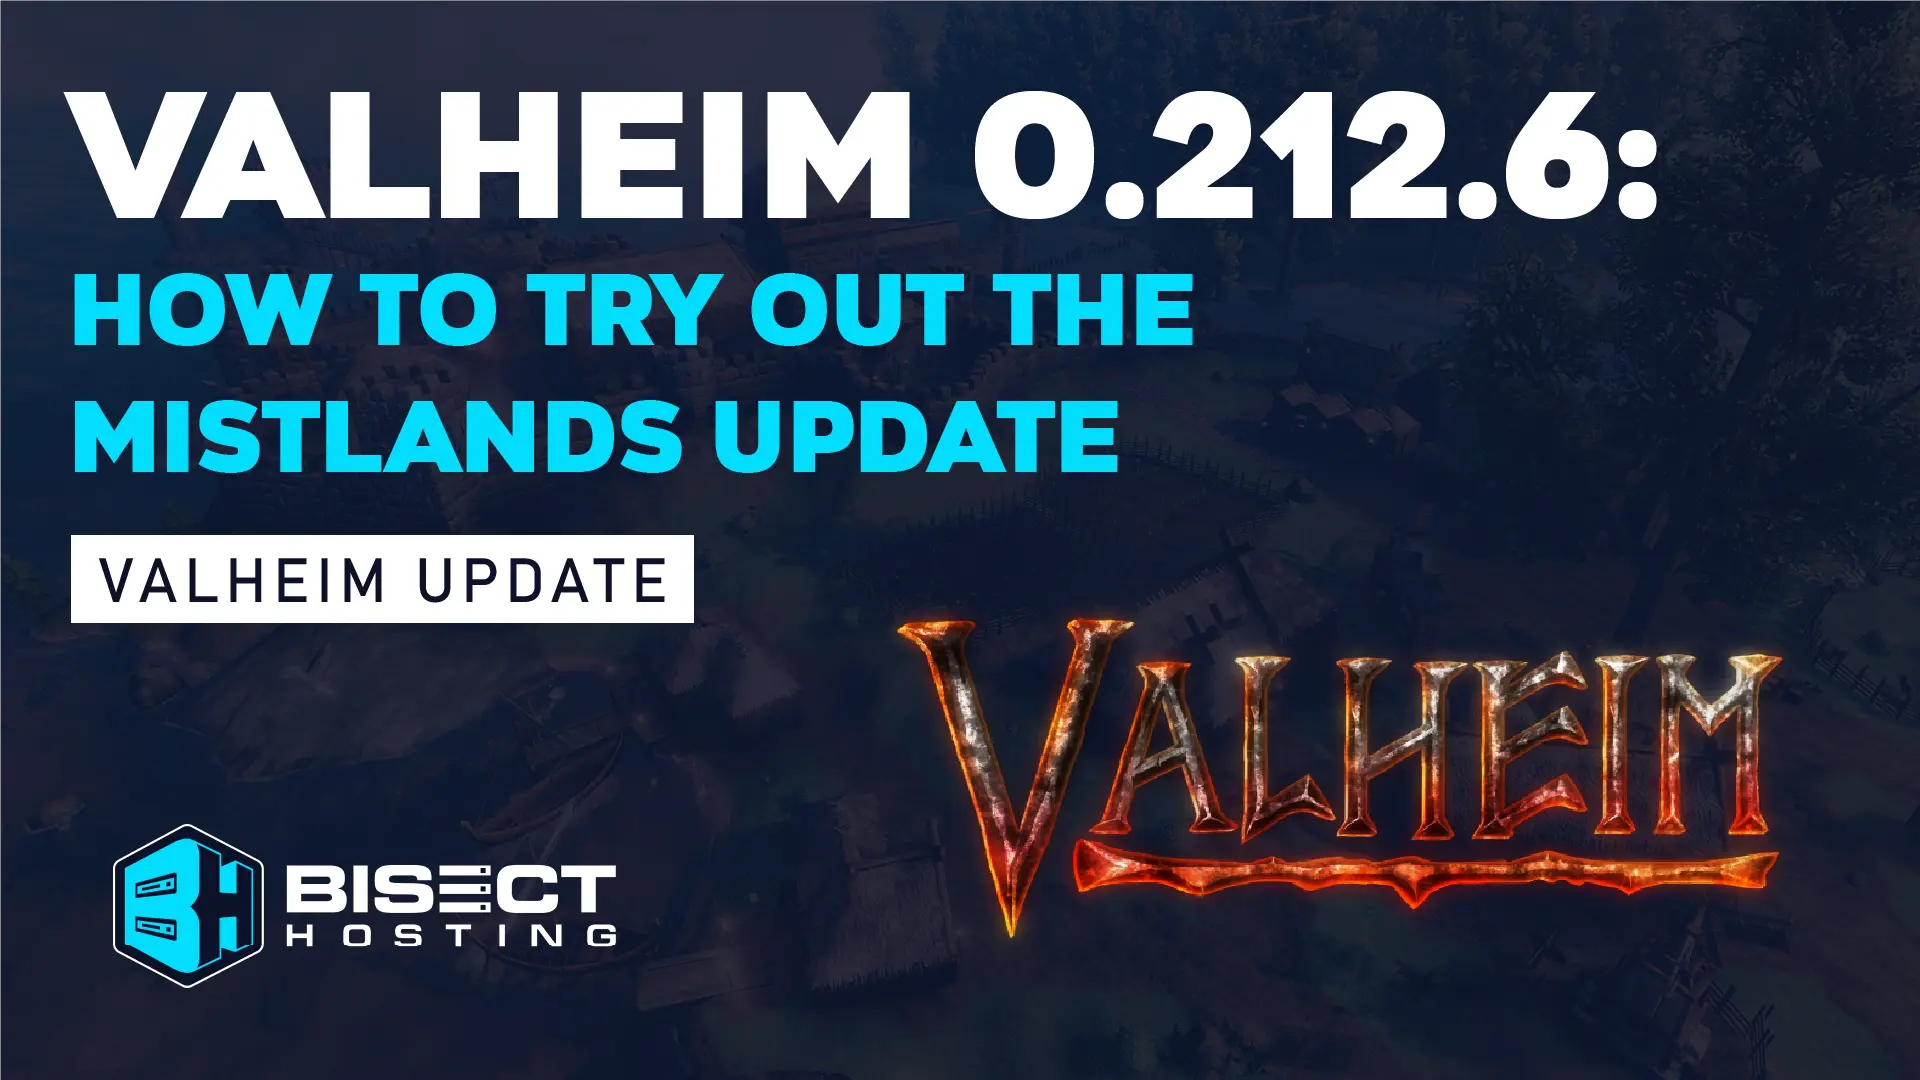 Valheim 0.212.6: How to Try Out the Mistlands Update